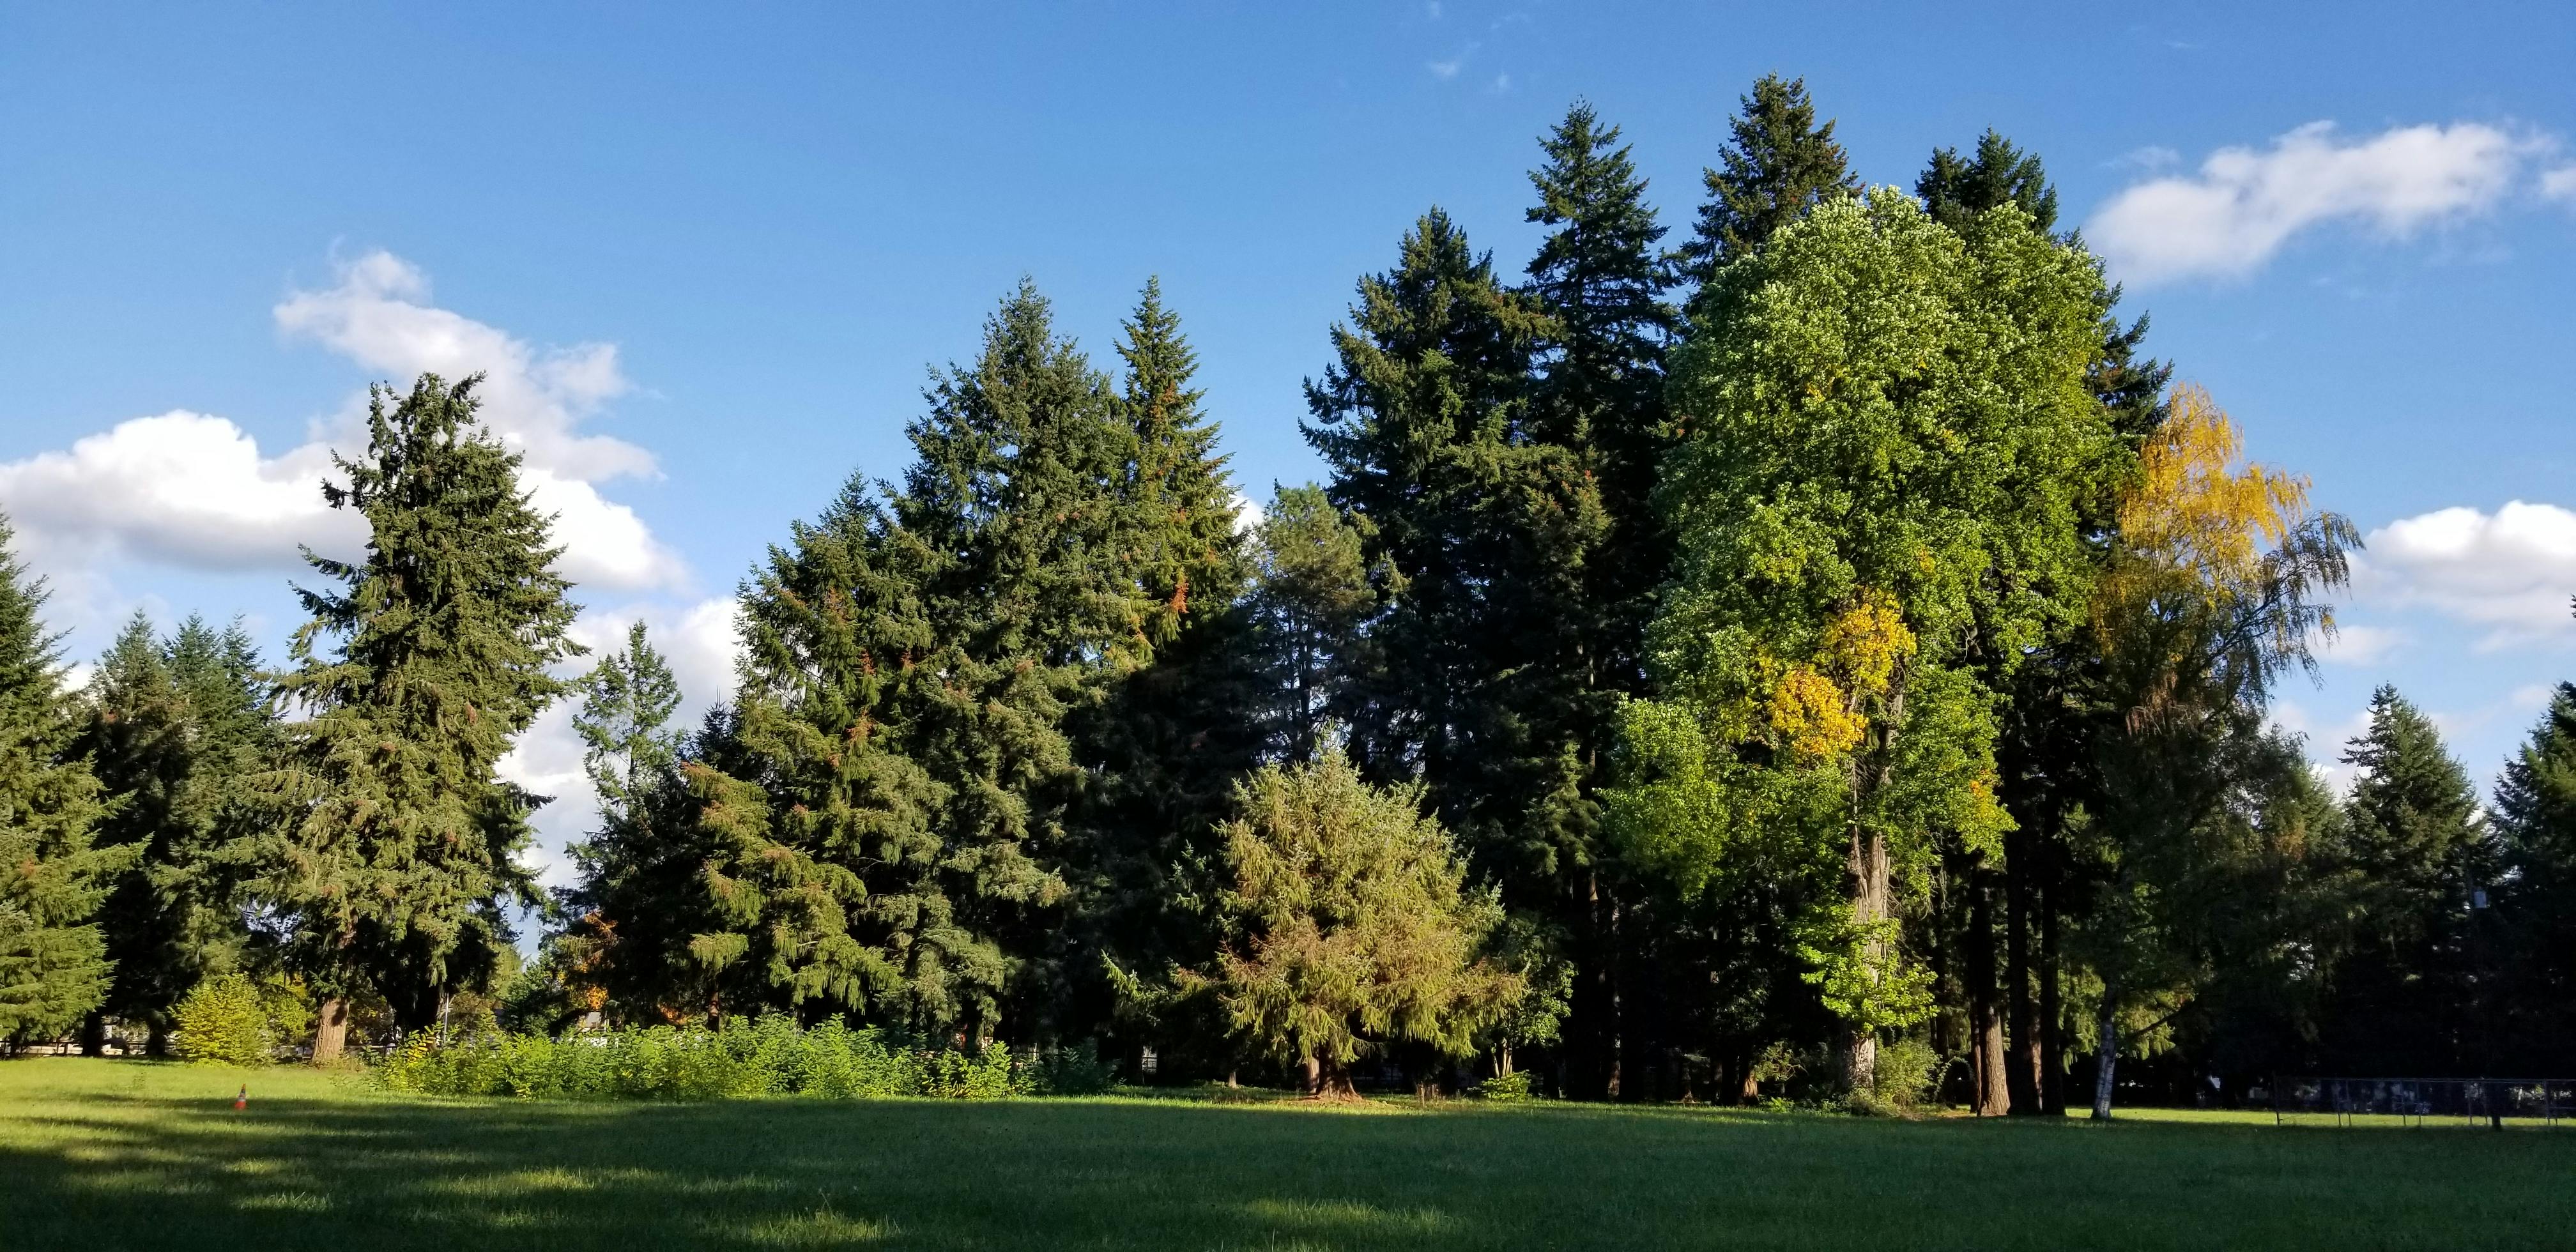 Shaffer Park houses a variety of trees